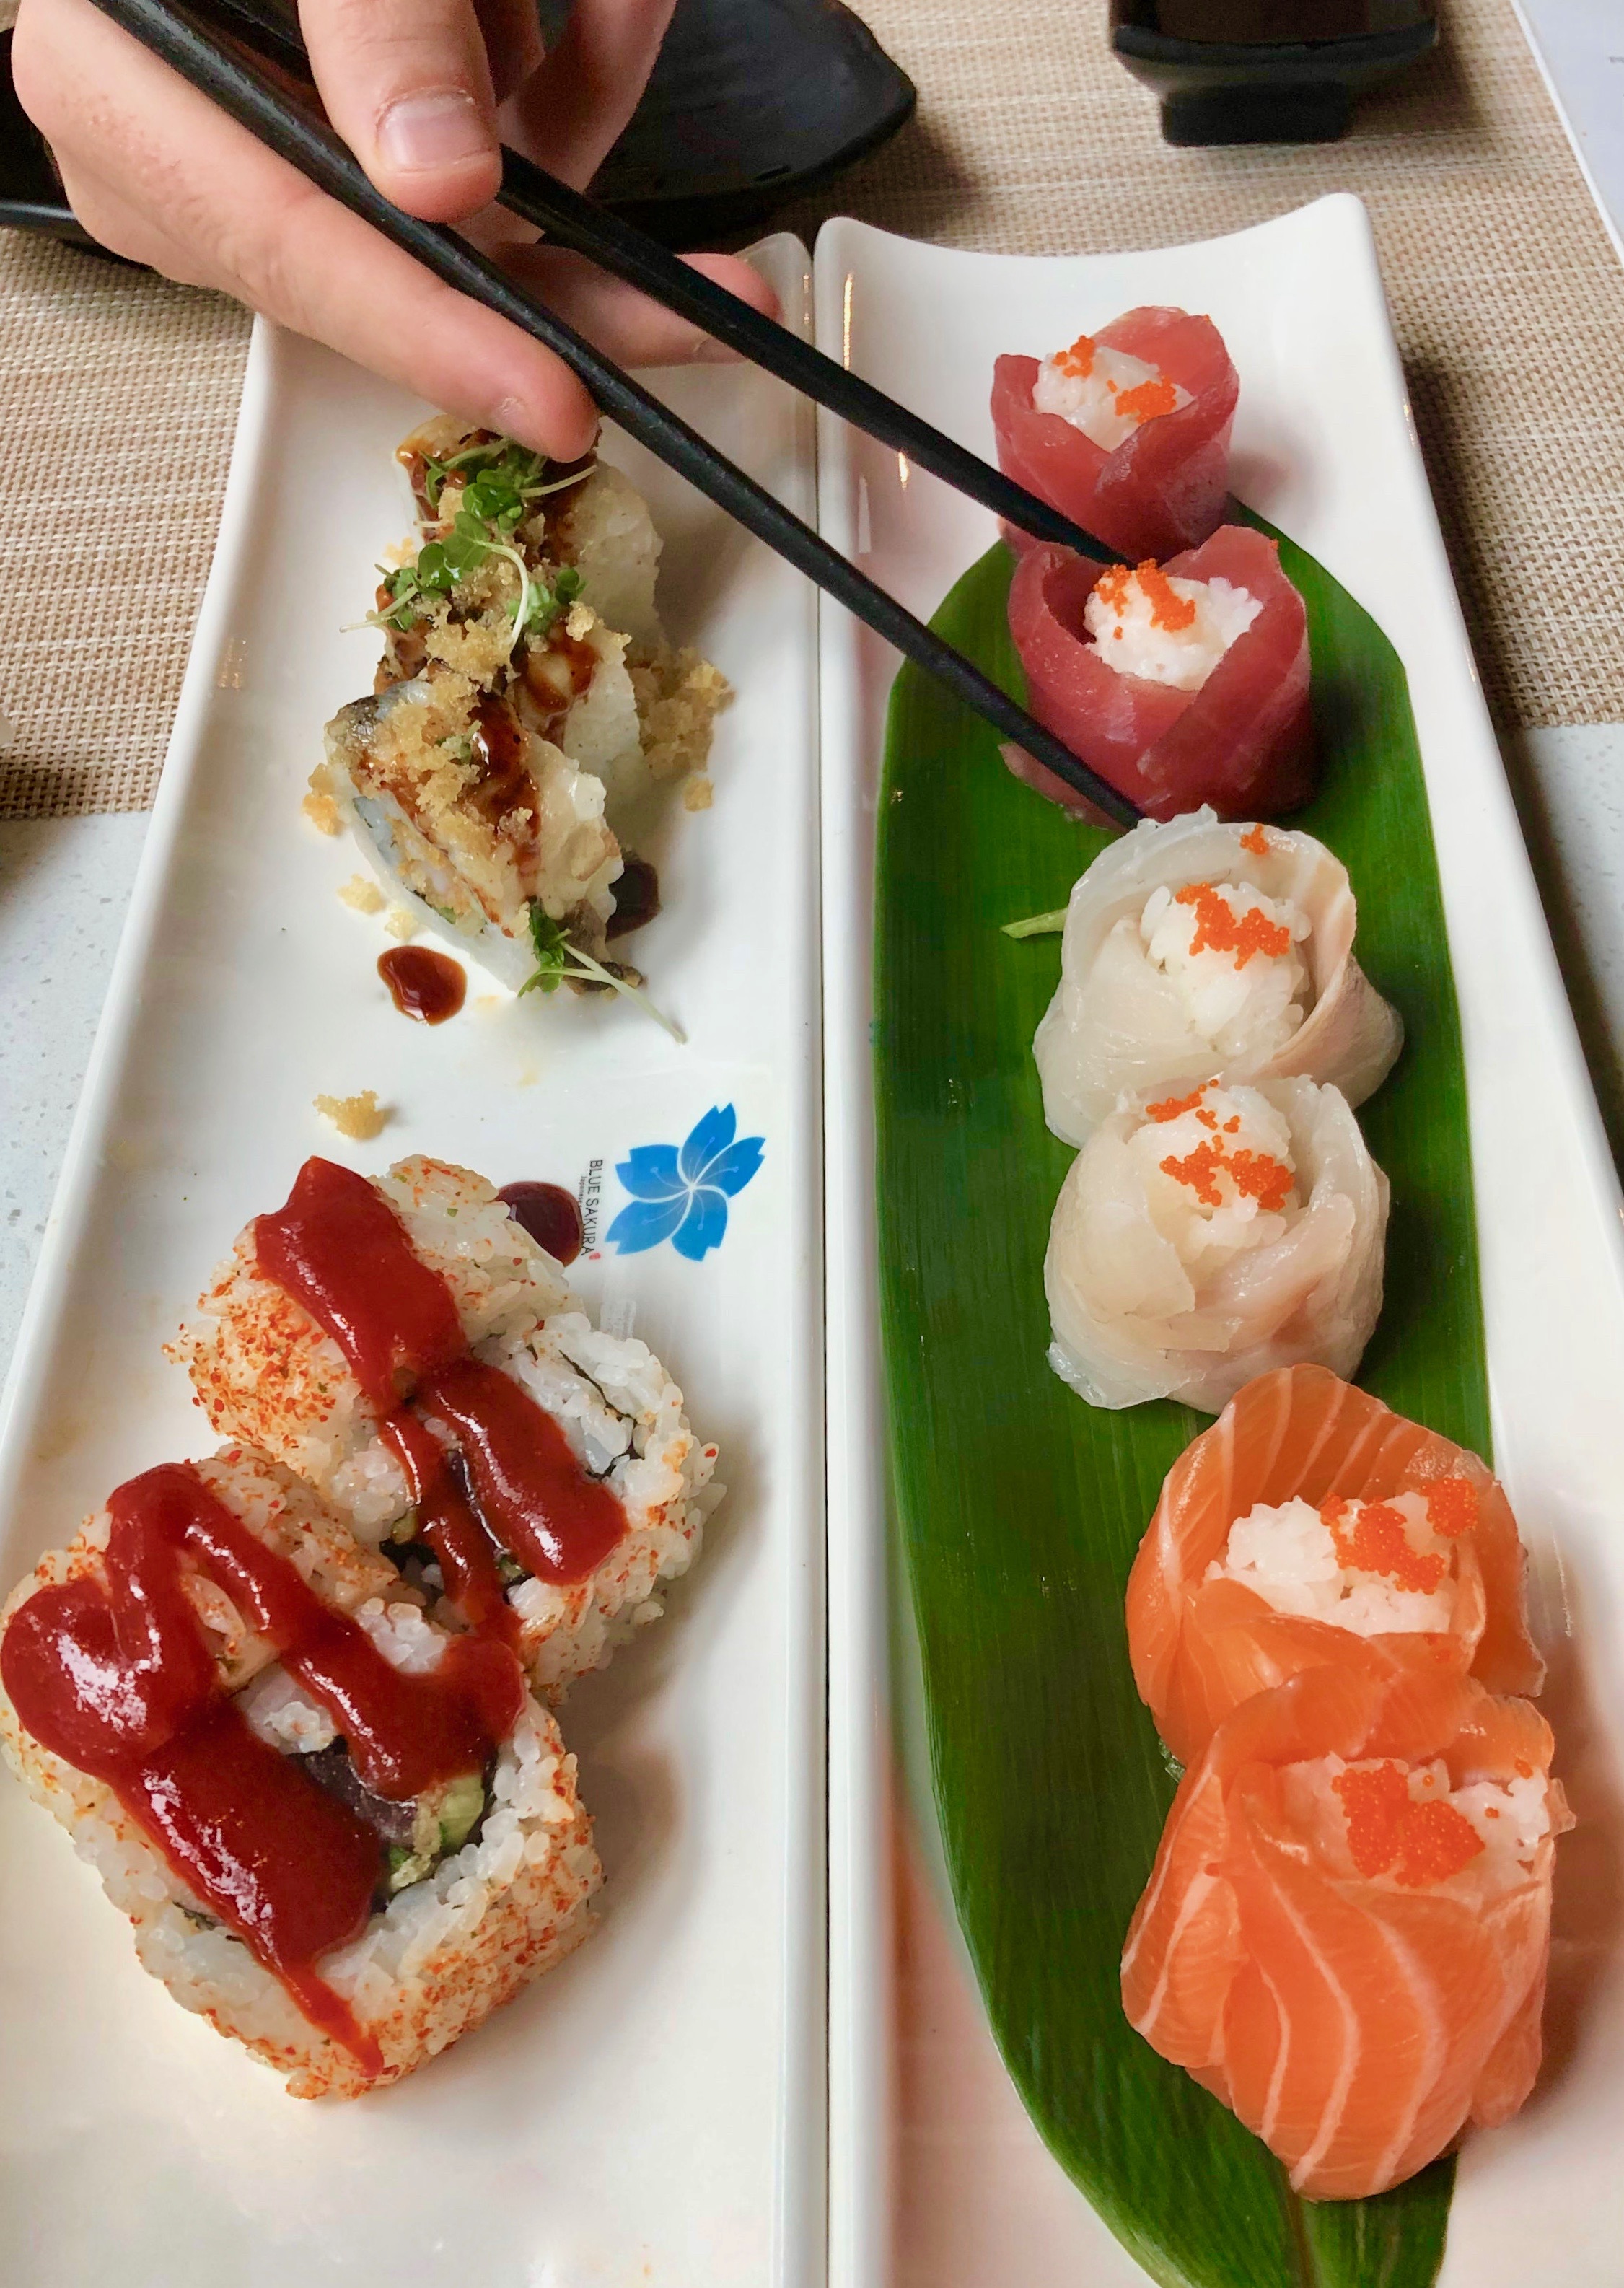 sushi in Leeds: Two long plates of sushi at Blue Sakura, showing different types of sushi and a tuna roll being picked up by chopsticks